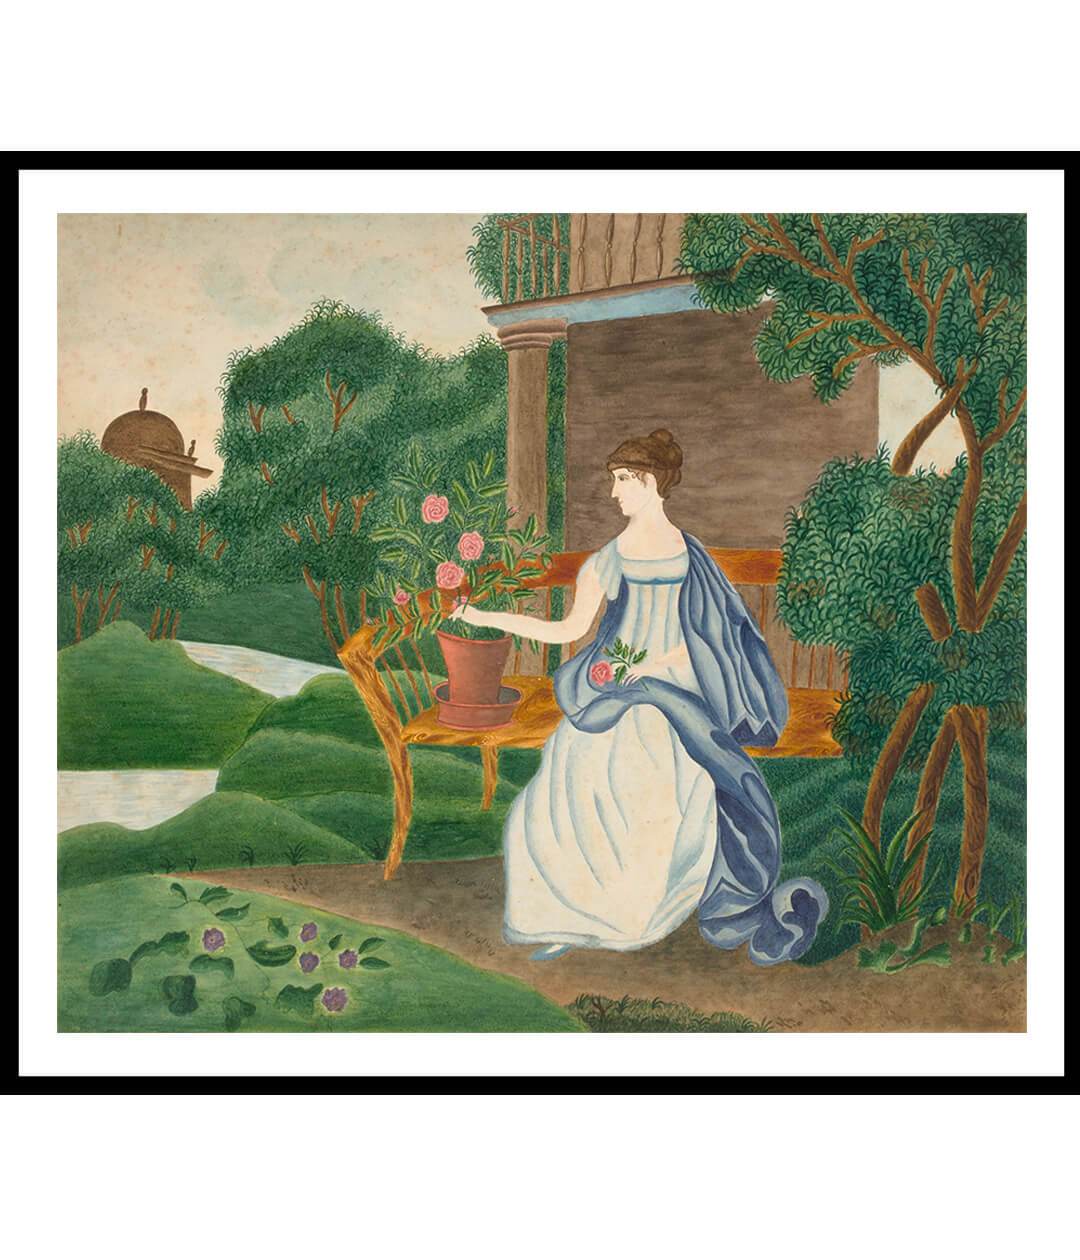 Woman in a Garden BySarah P. Wells Landscape Painting